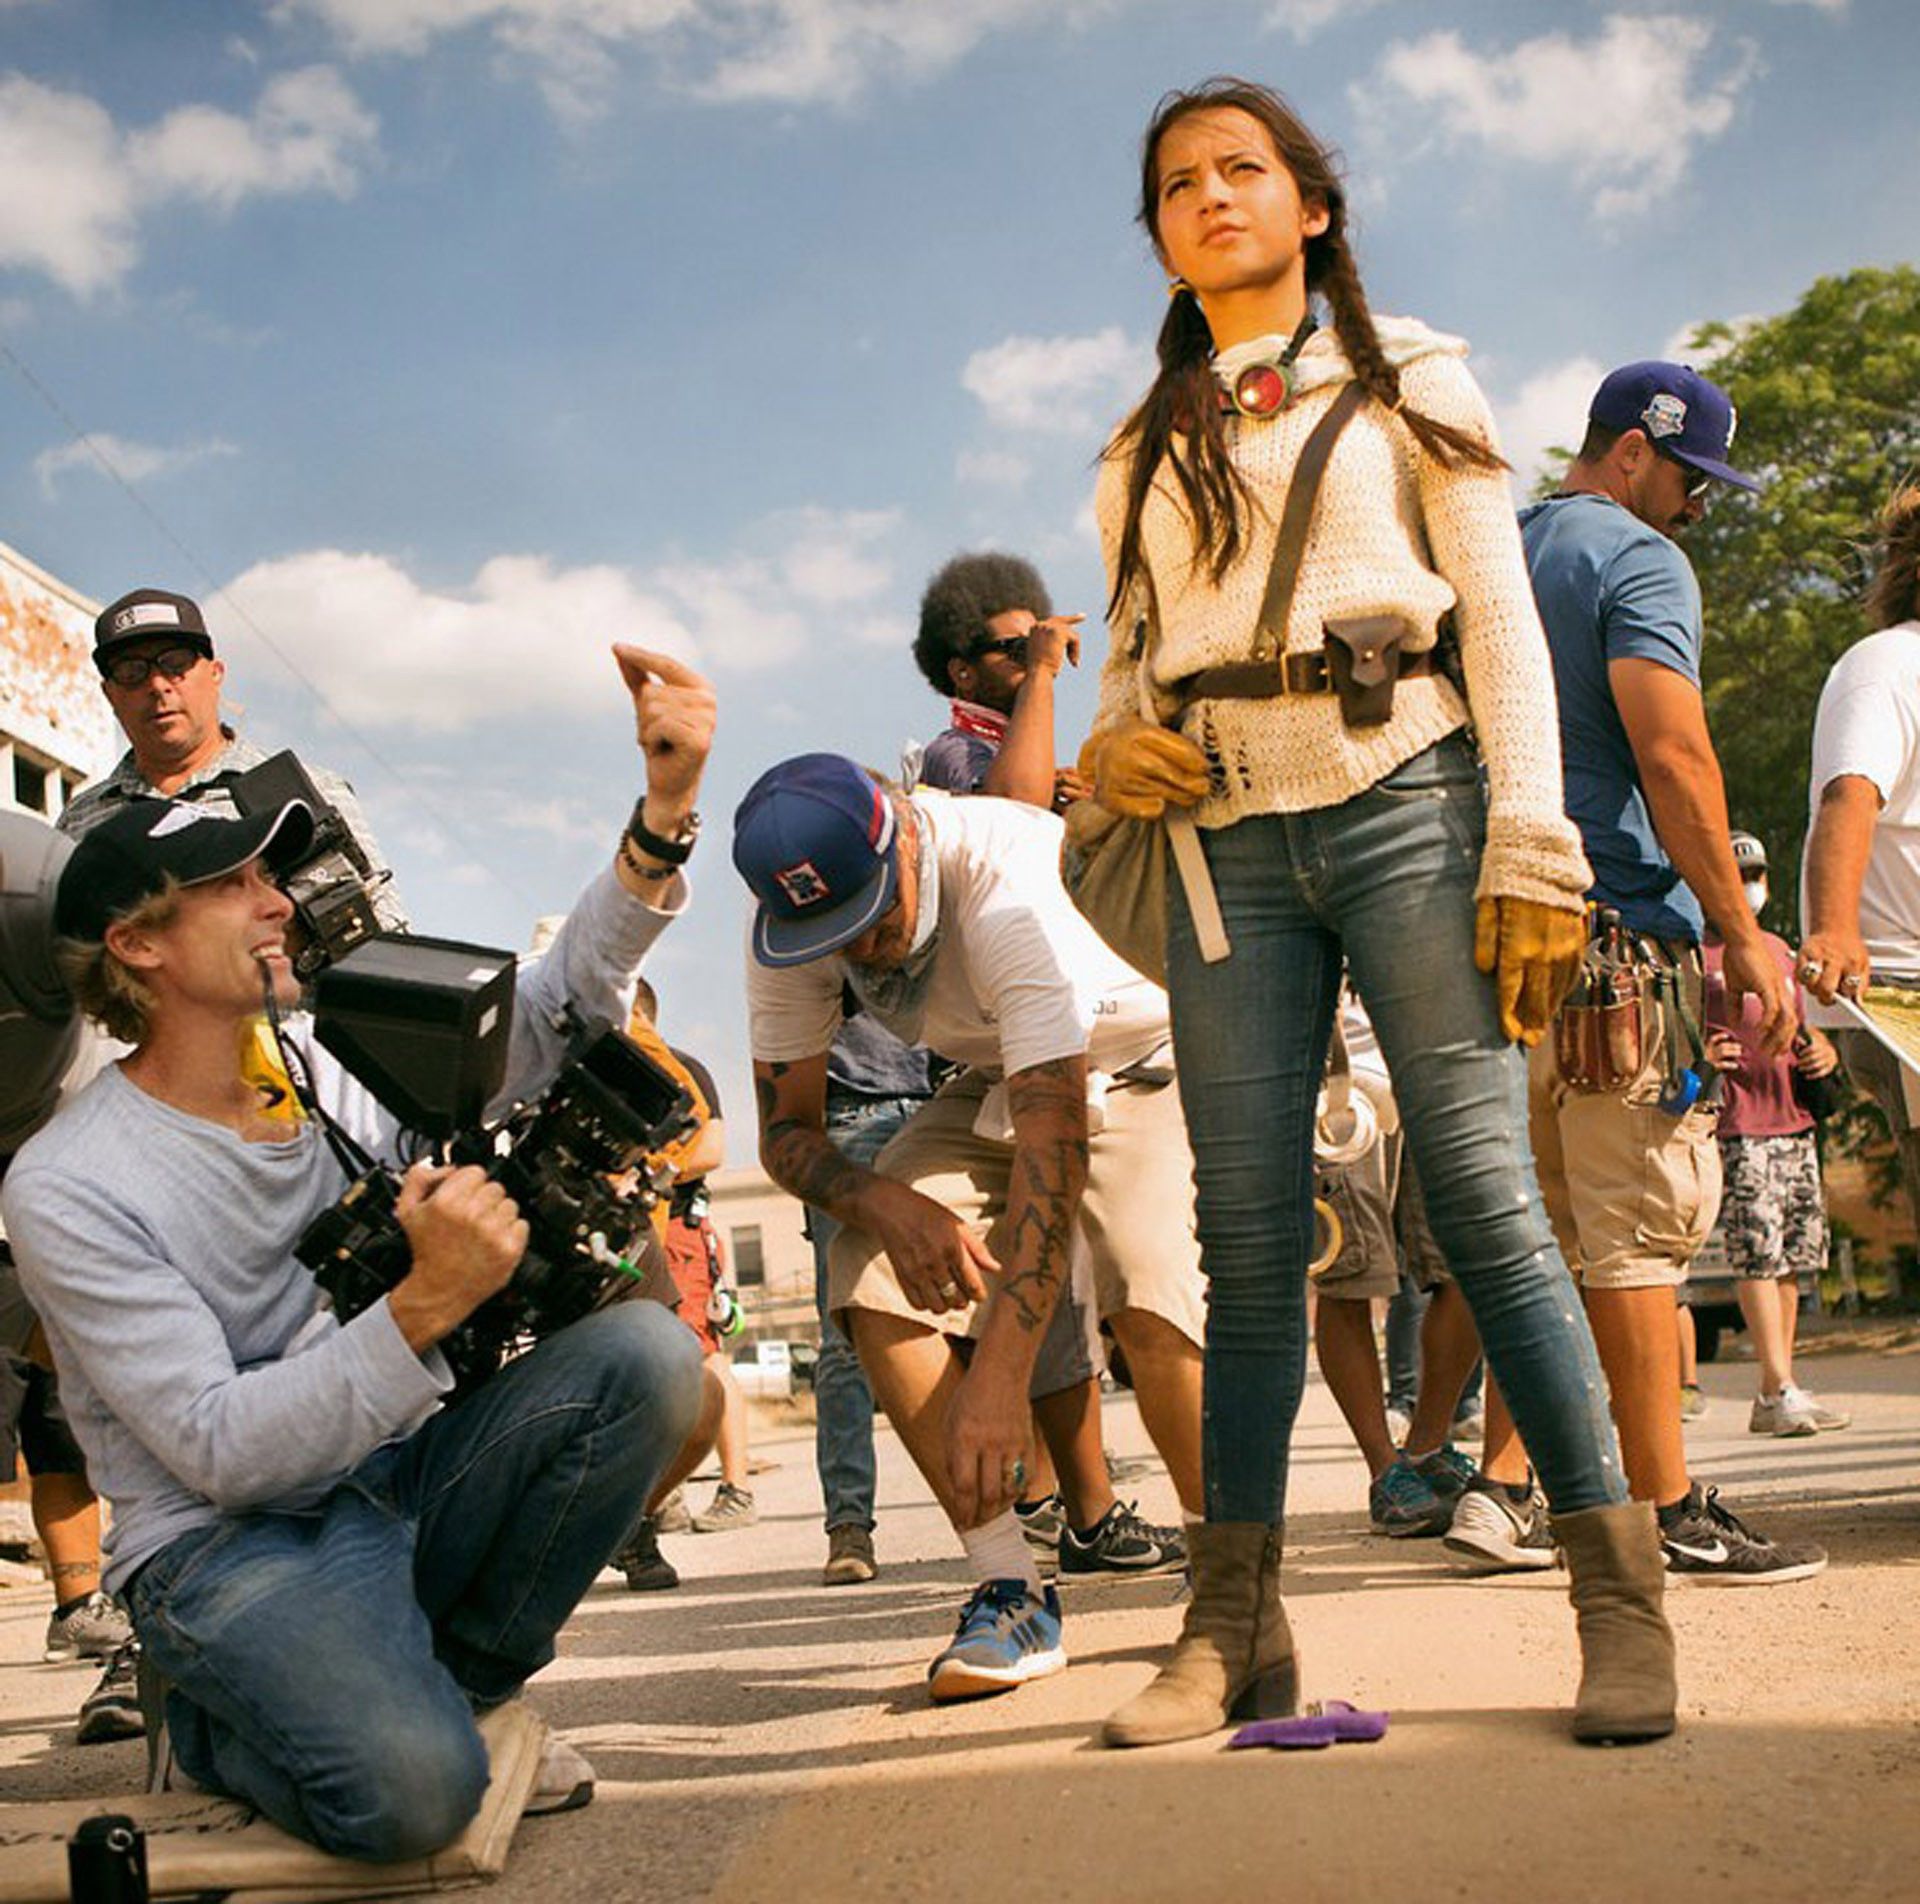 Fans get first glimpse of new Transformers leading lady as Isabela